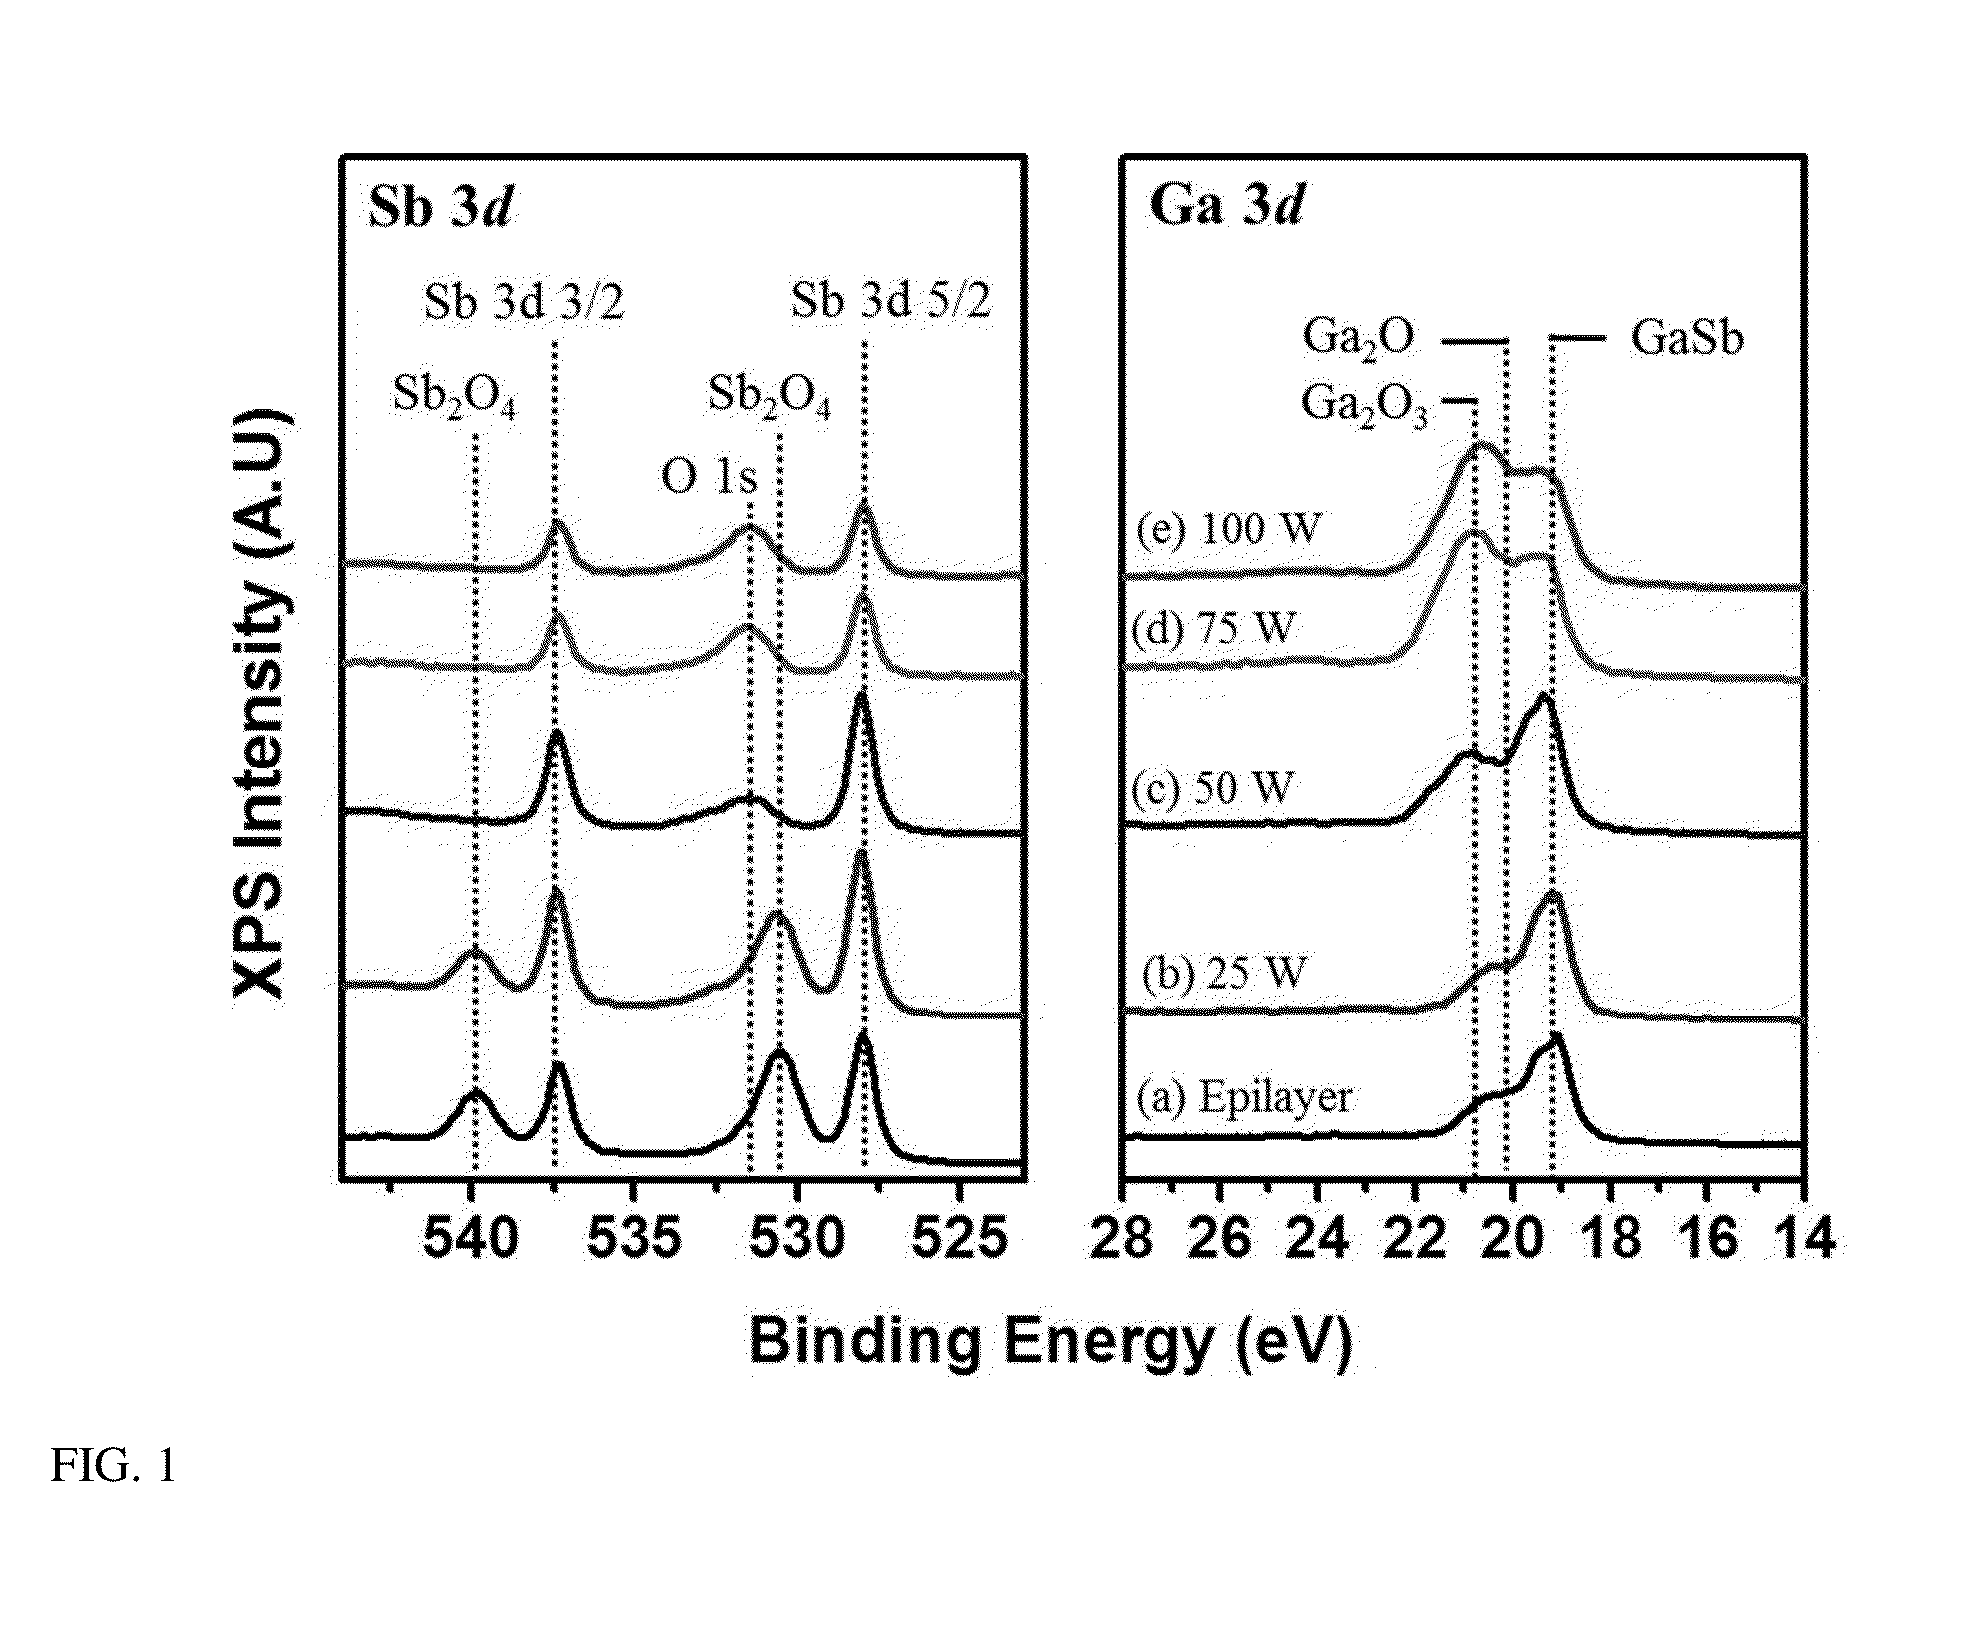 Hydrogen-plasma process for surface preparation prior to insulator deposition on compound semiconductor materials